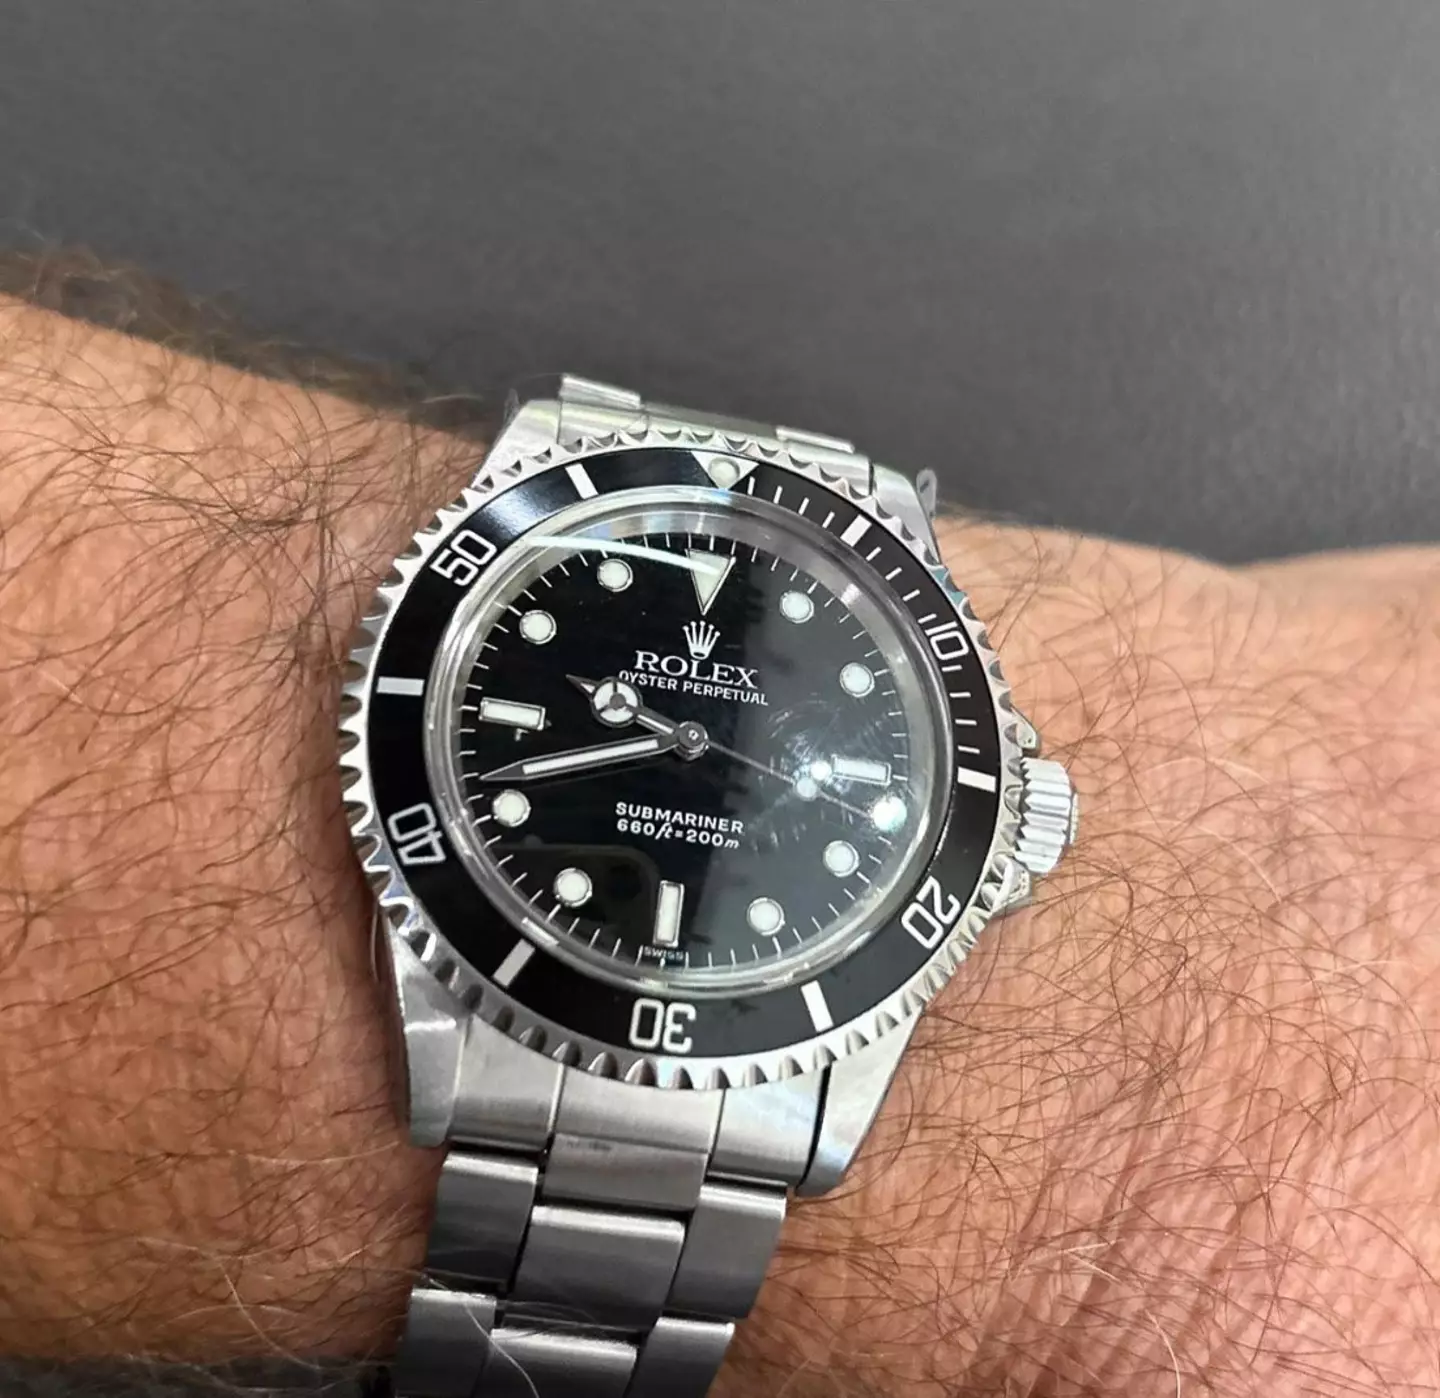 Ric's Rolex Submariner was fully restored and looks as good as new.